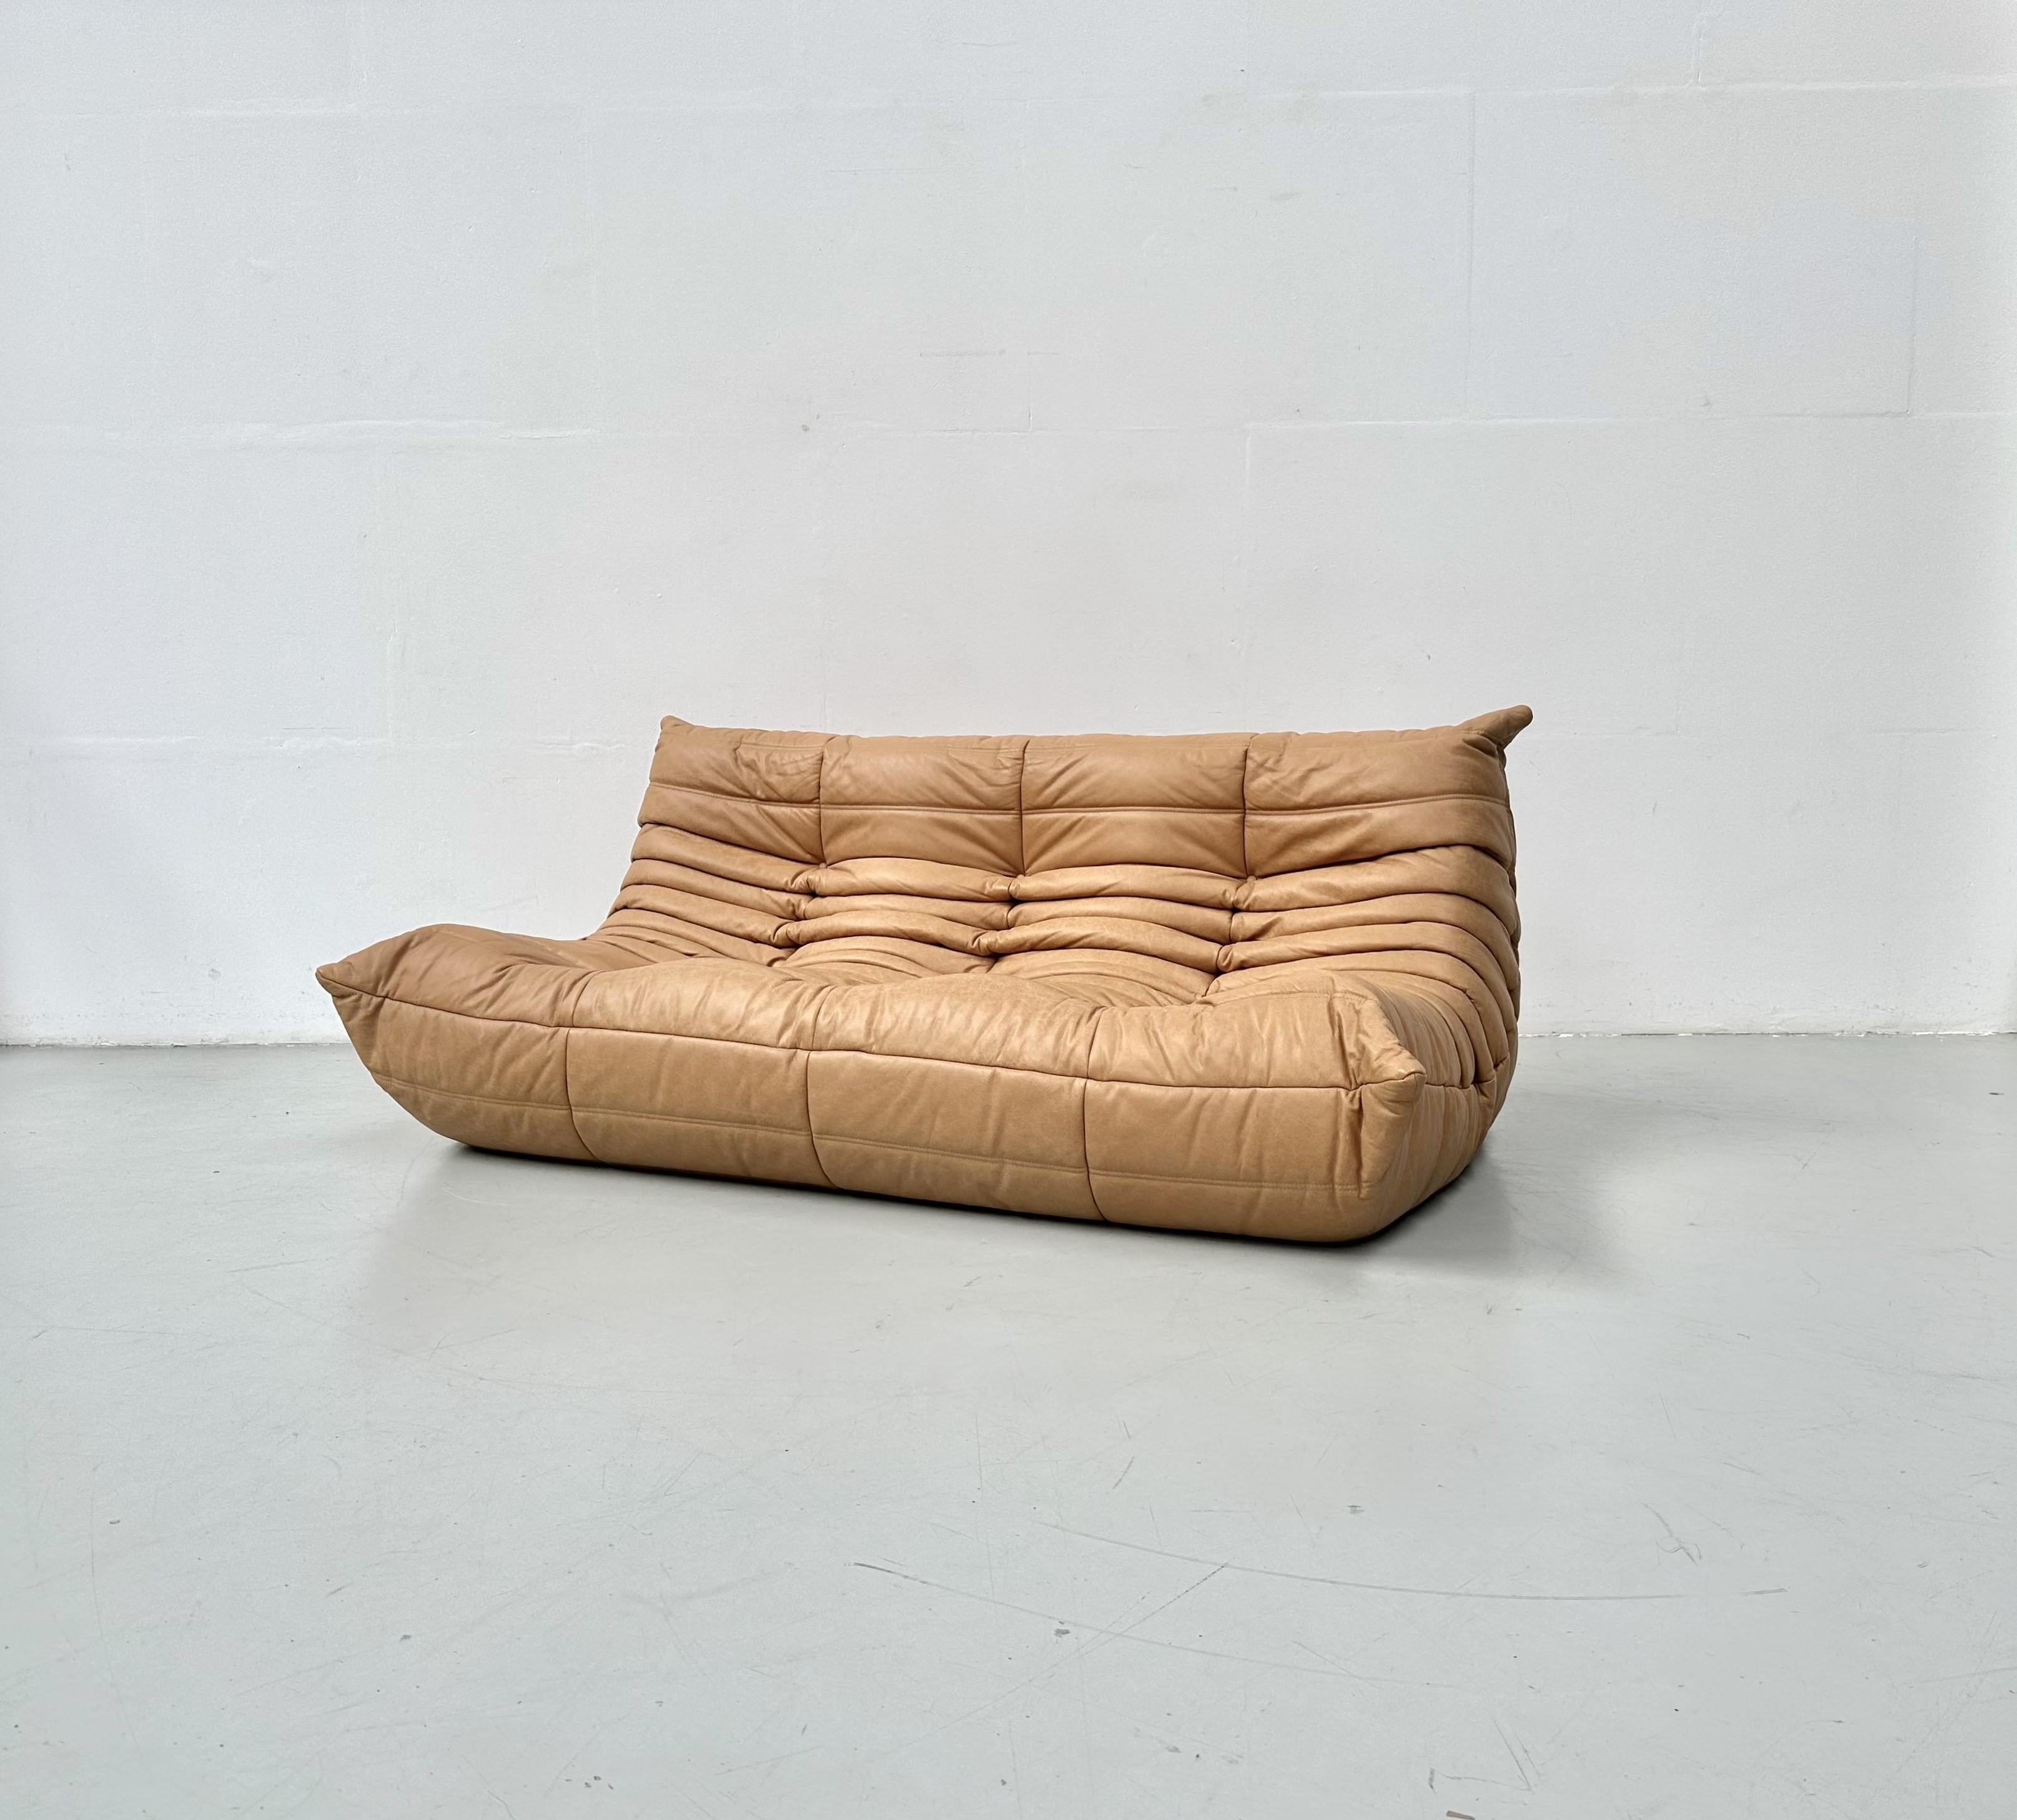 French Togo Sofa in Camel Leather by Michel Ducaroy for Ligne Roset. In Excellent Condition For Sale In Eindhoven, Noord Brabant